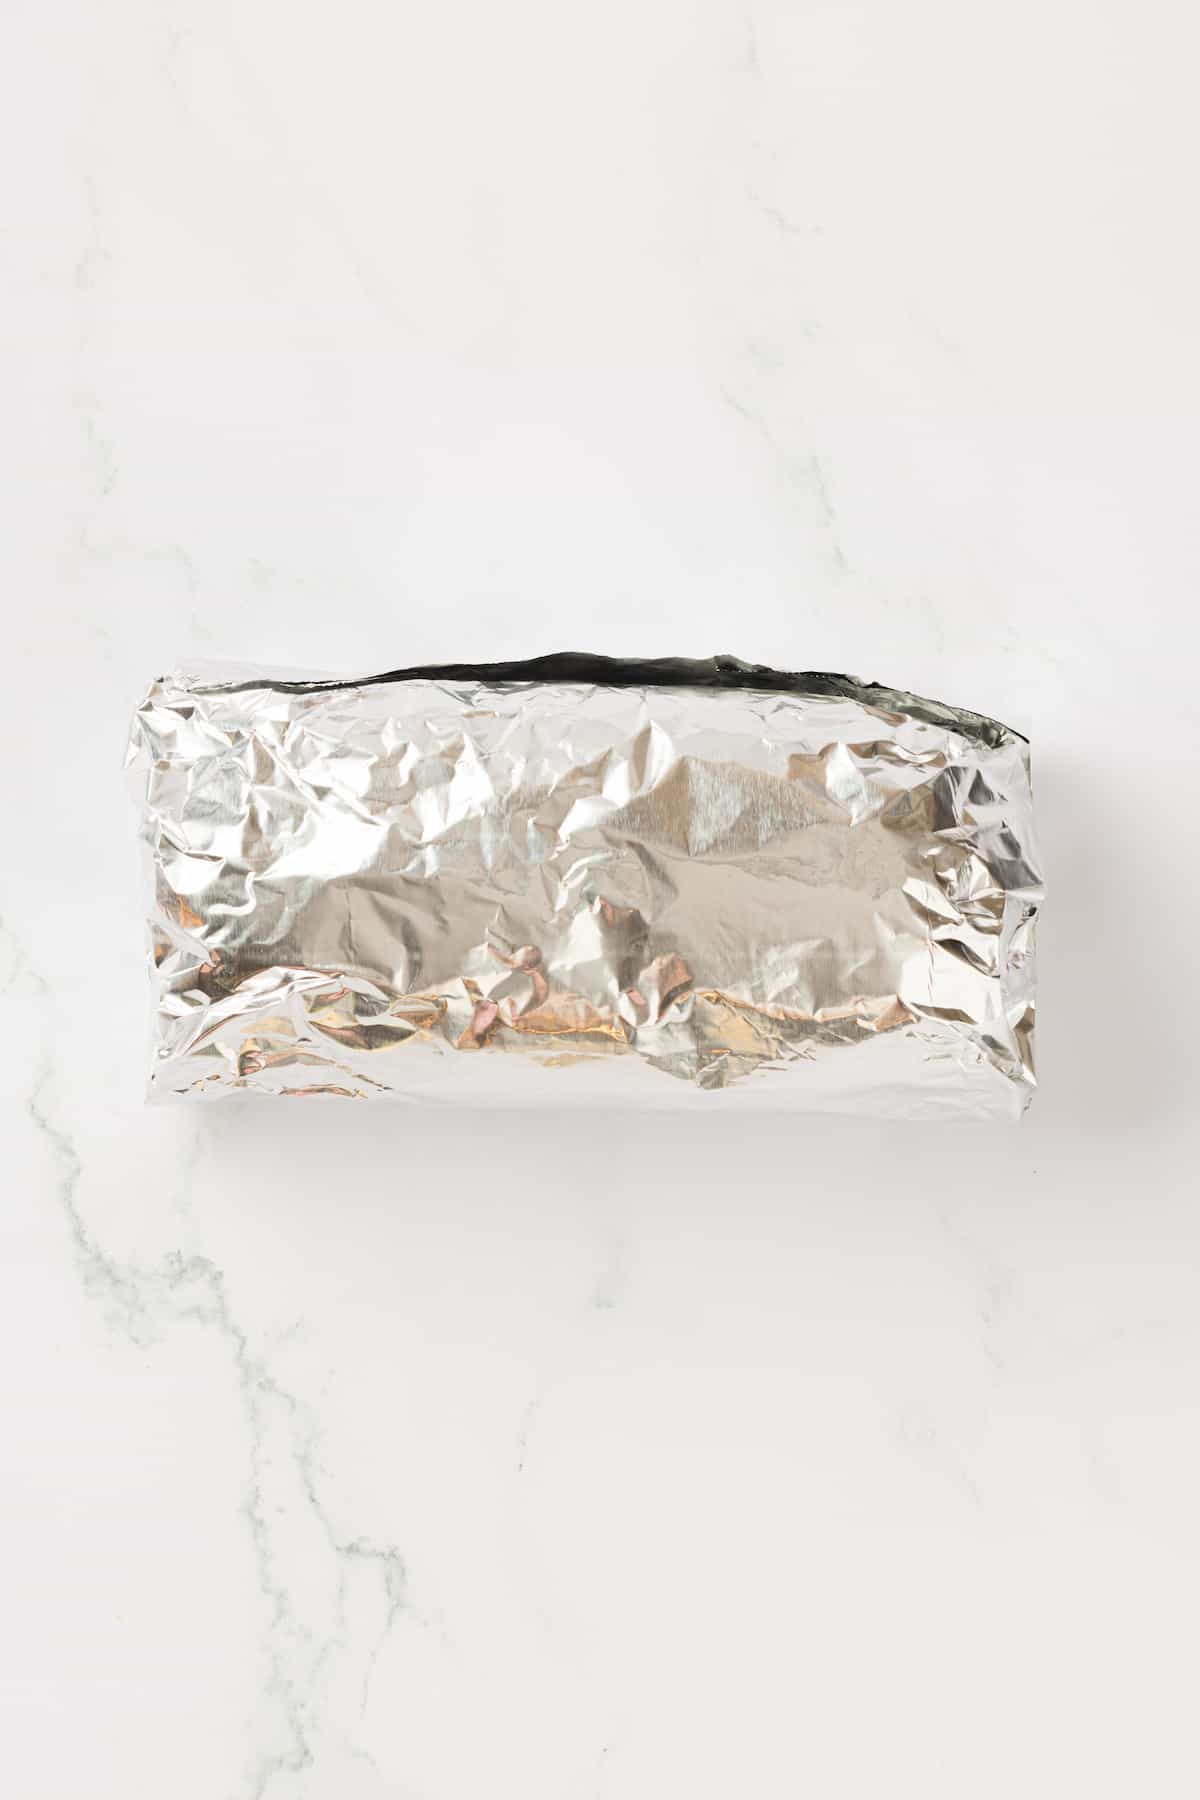 Vegan chicken wrapped in foil